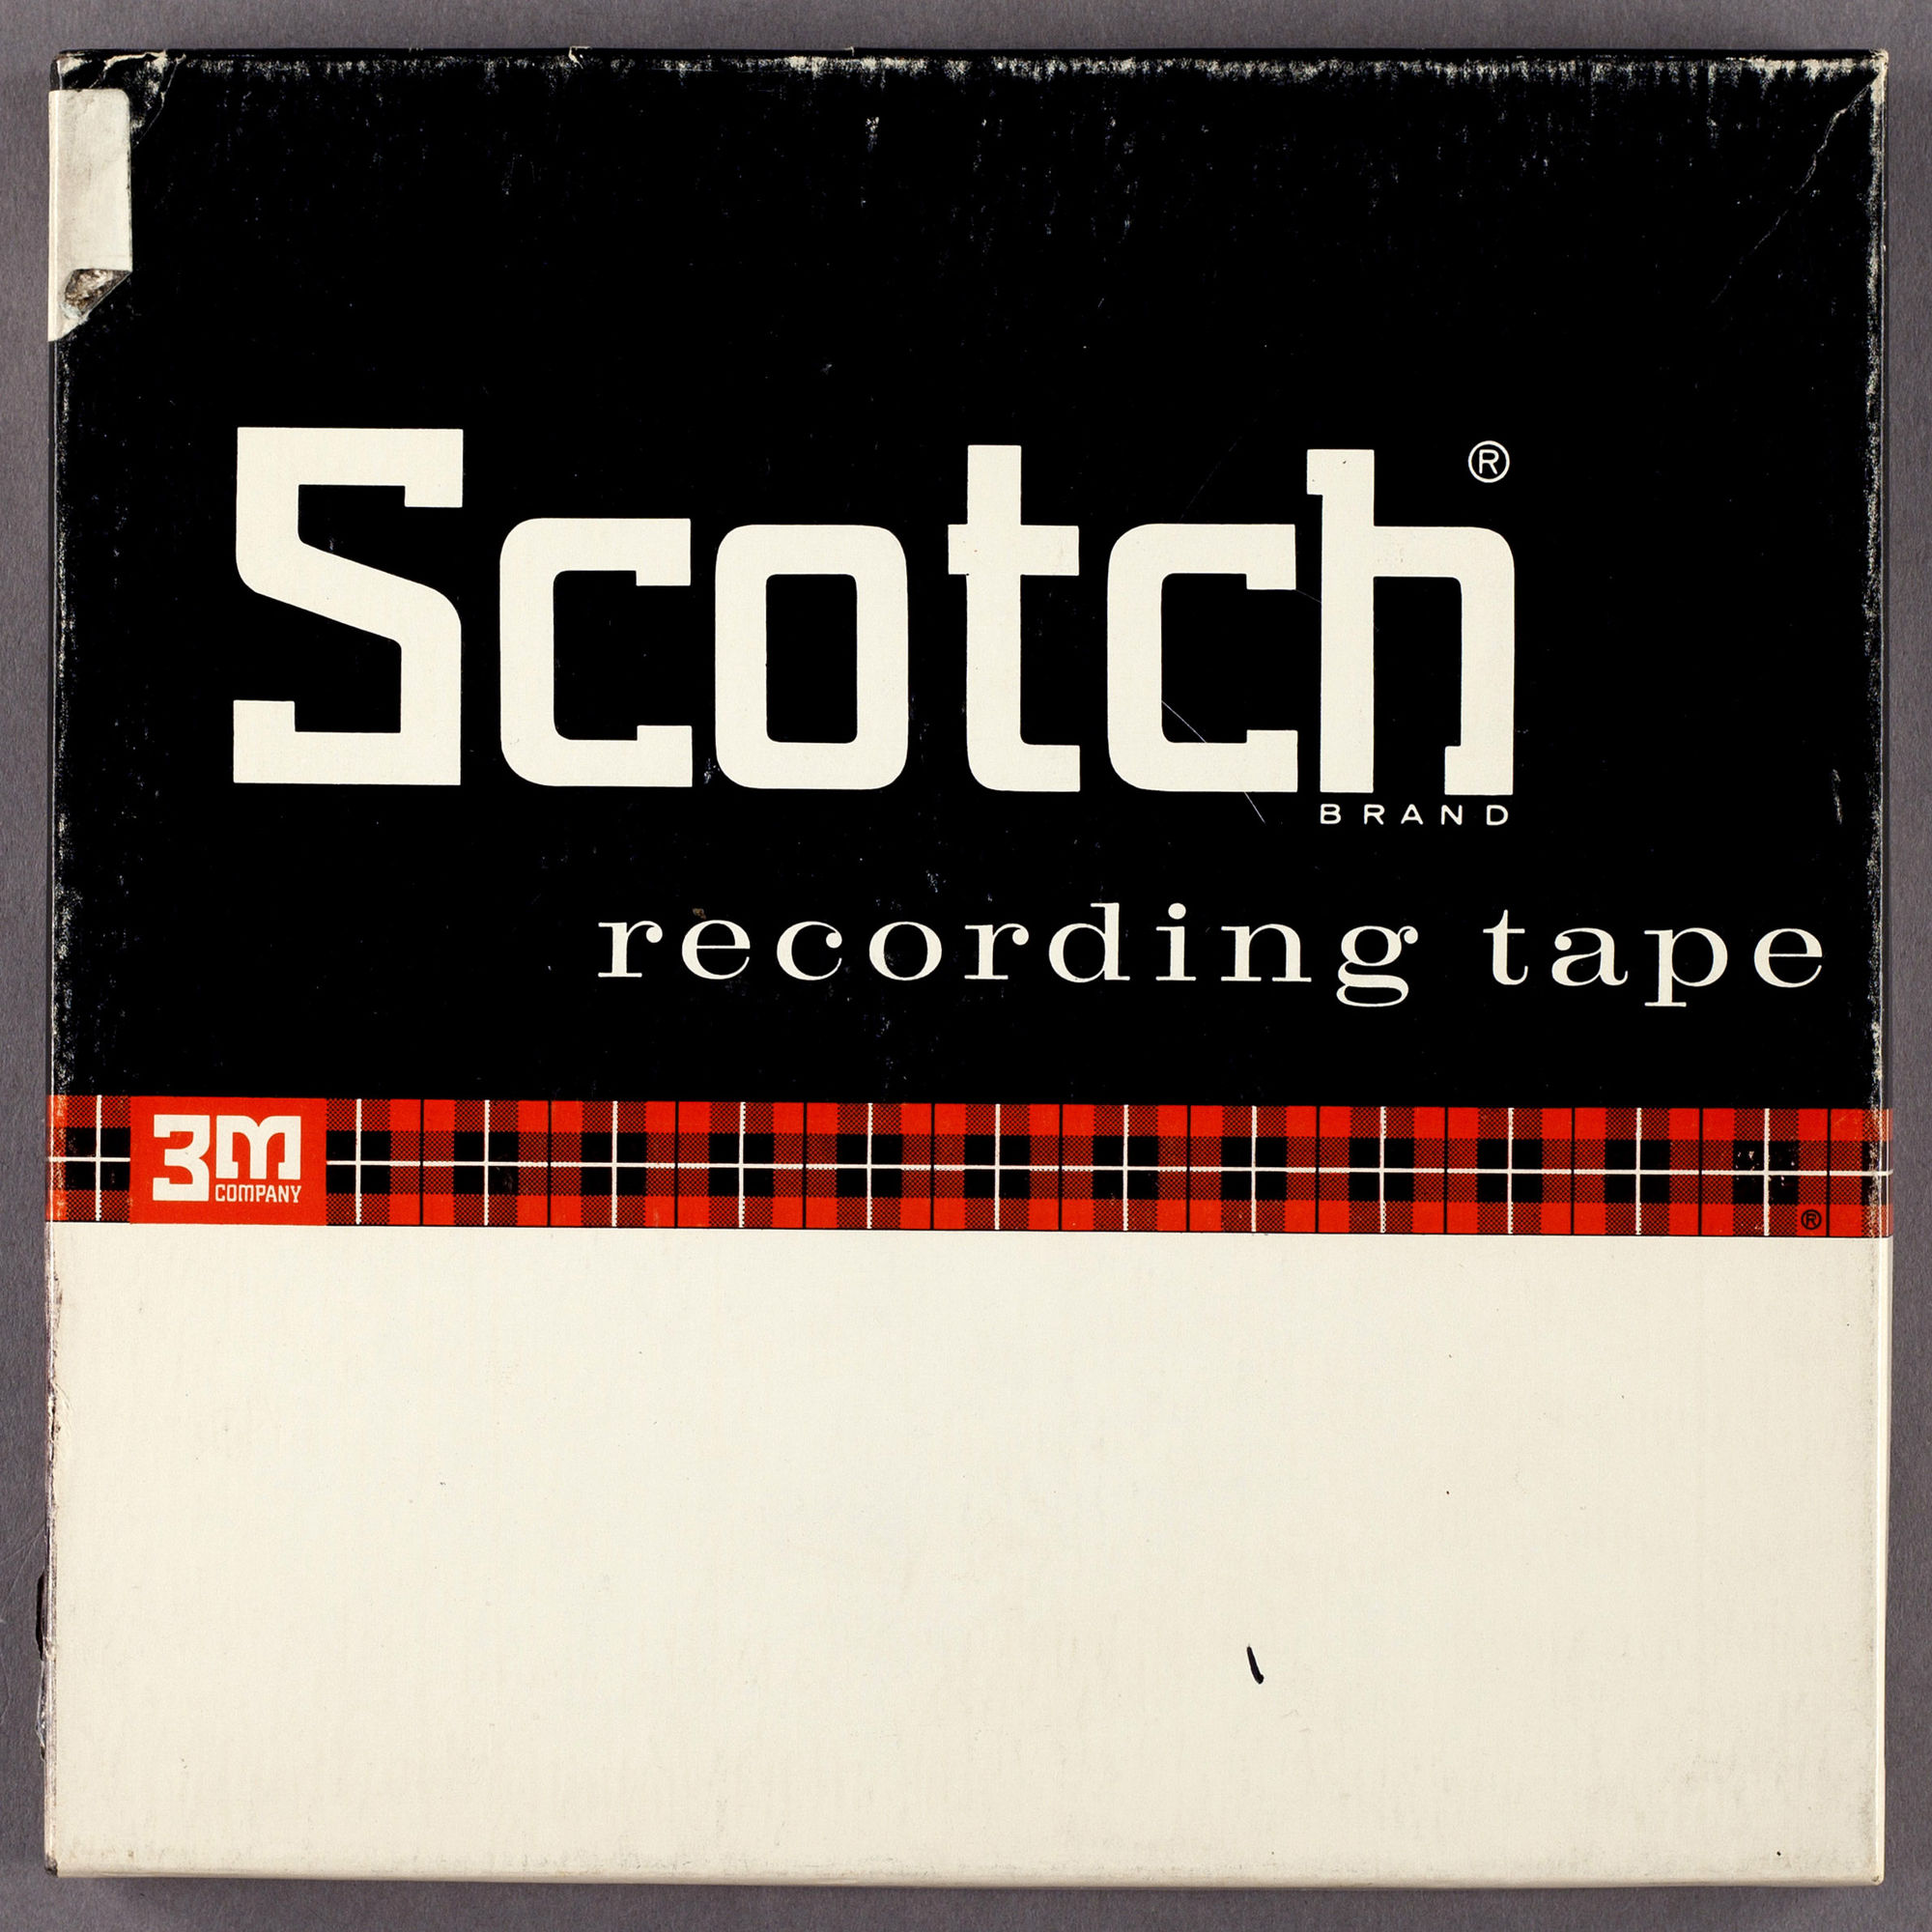 Scotch Used Metal Aluminum Take Up Reel Box 1/4" or 1/2" tape 14" inch No tape 